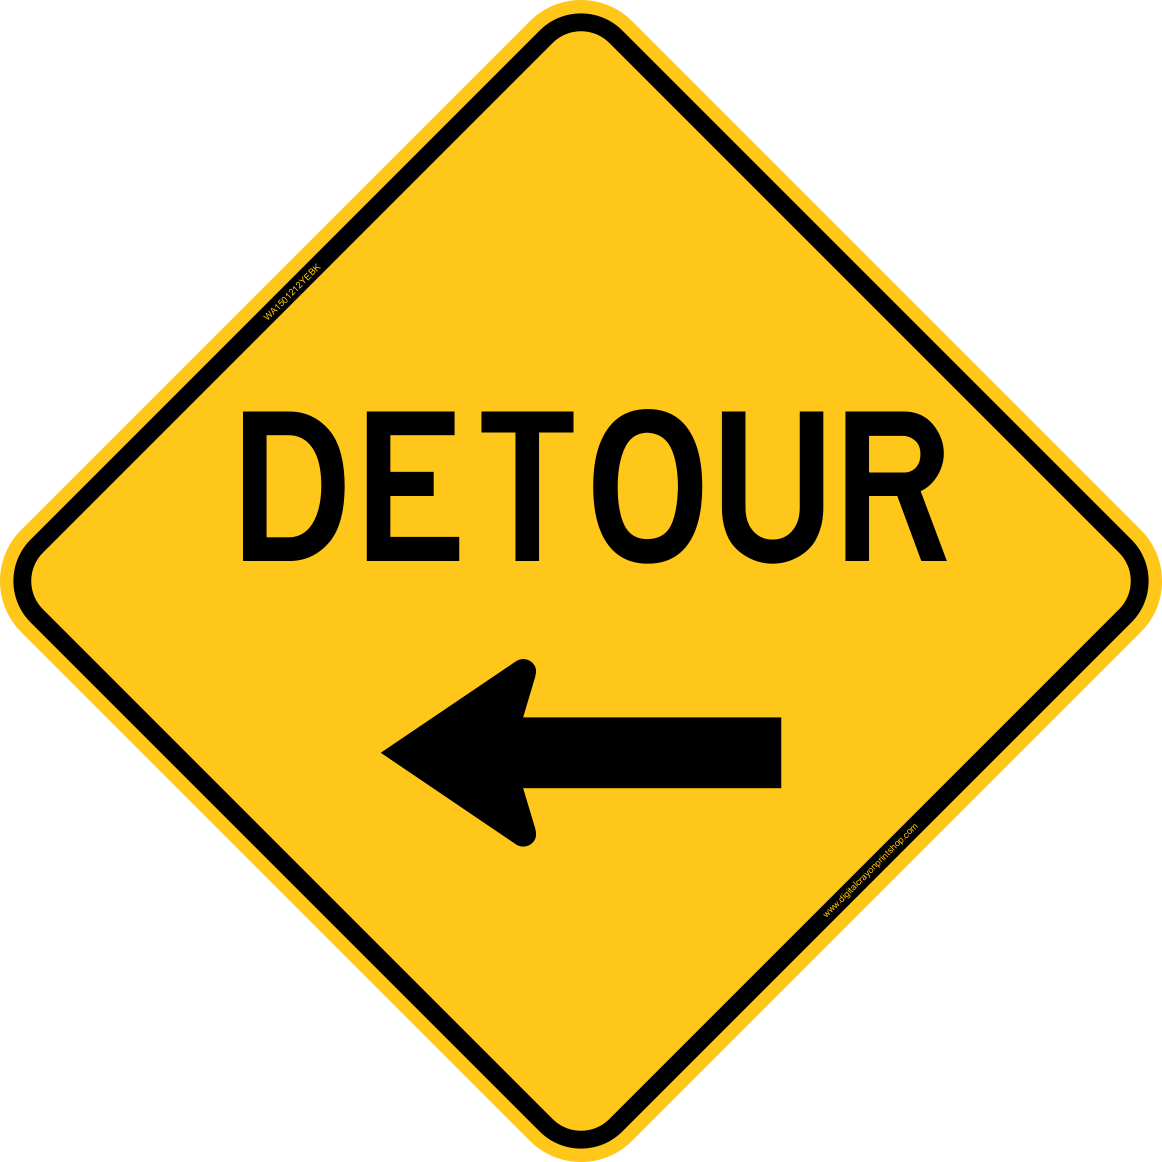 Detour With Left Arrow Warning Trail Sign - You Are So Small (1162x1162)